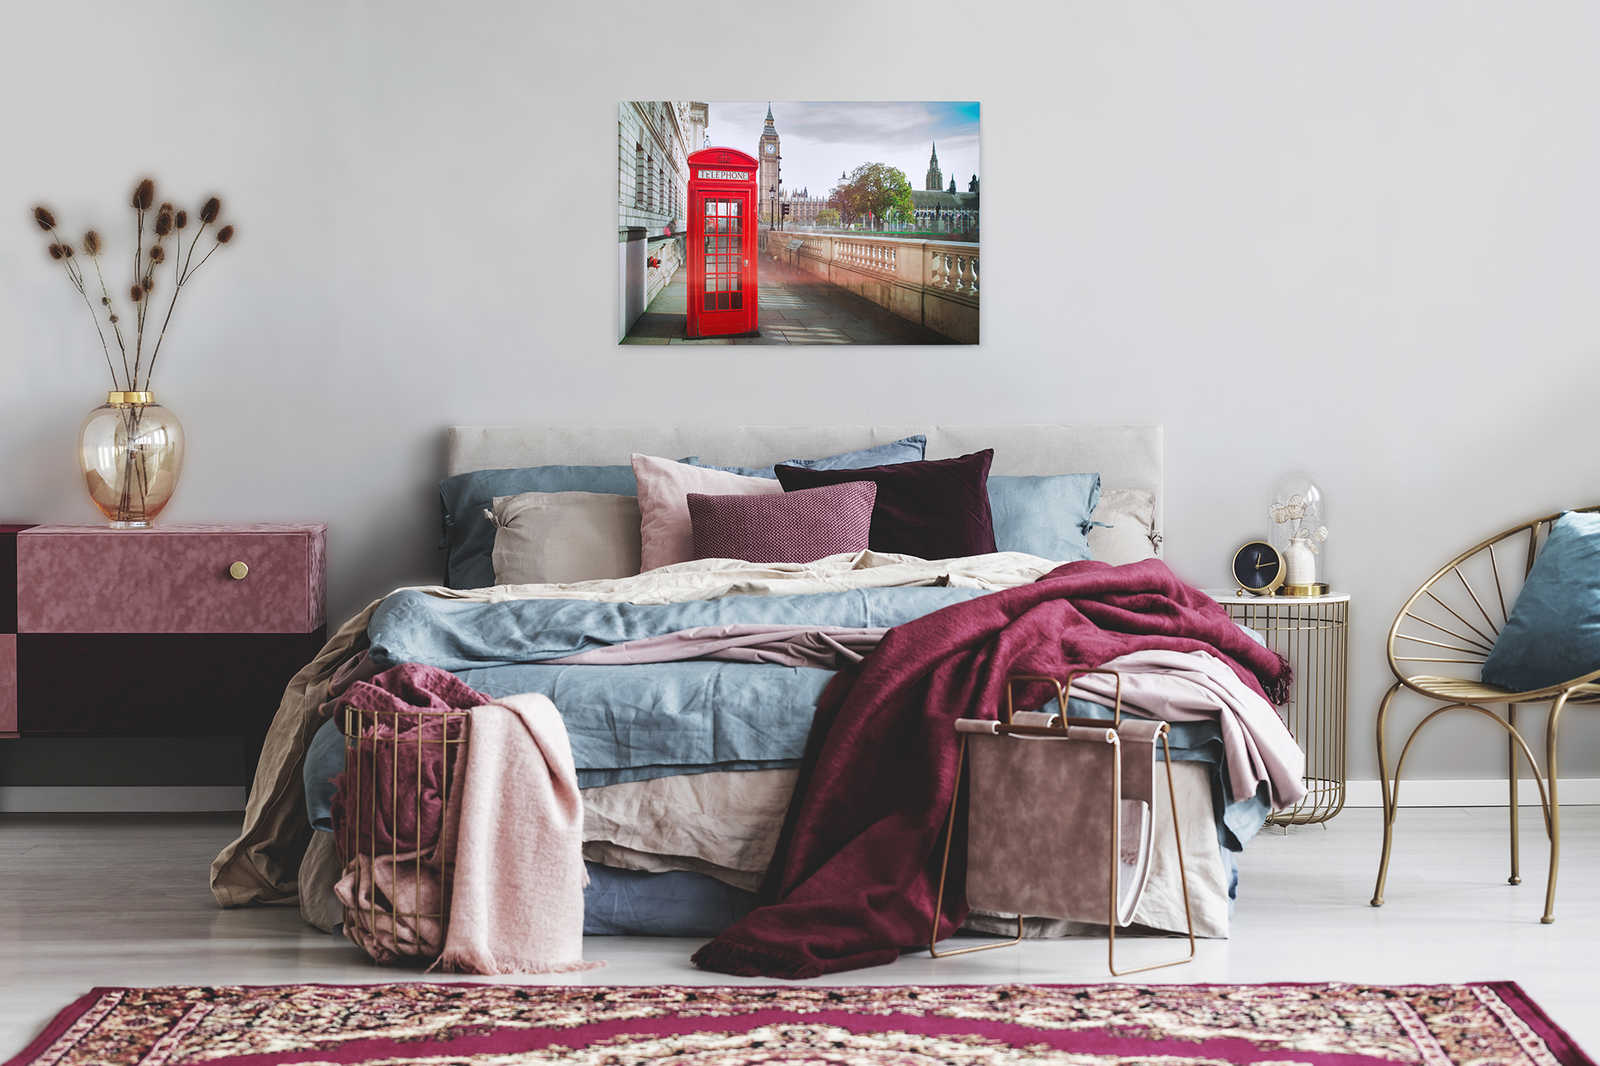             Canvas with red telephone box in London - 0.90 m x 0.60 m
        